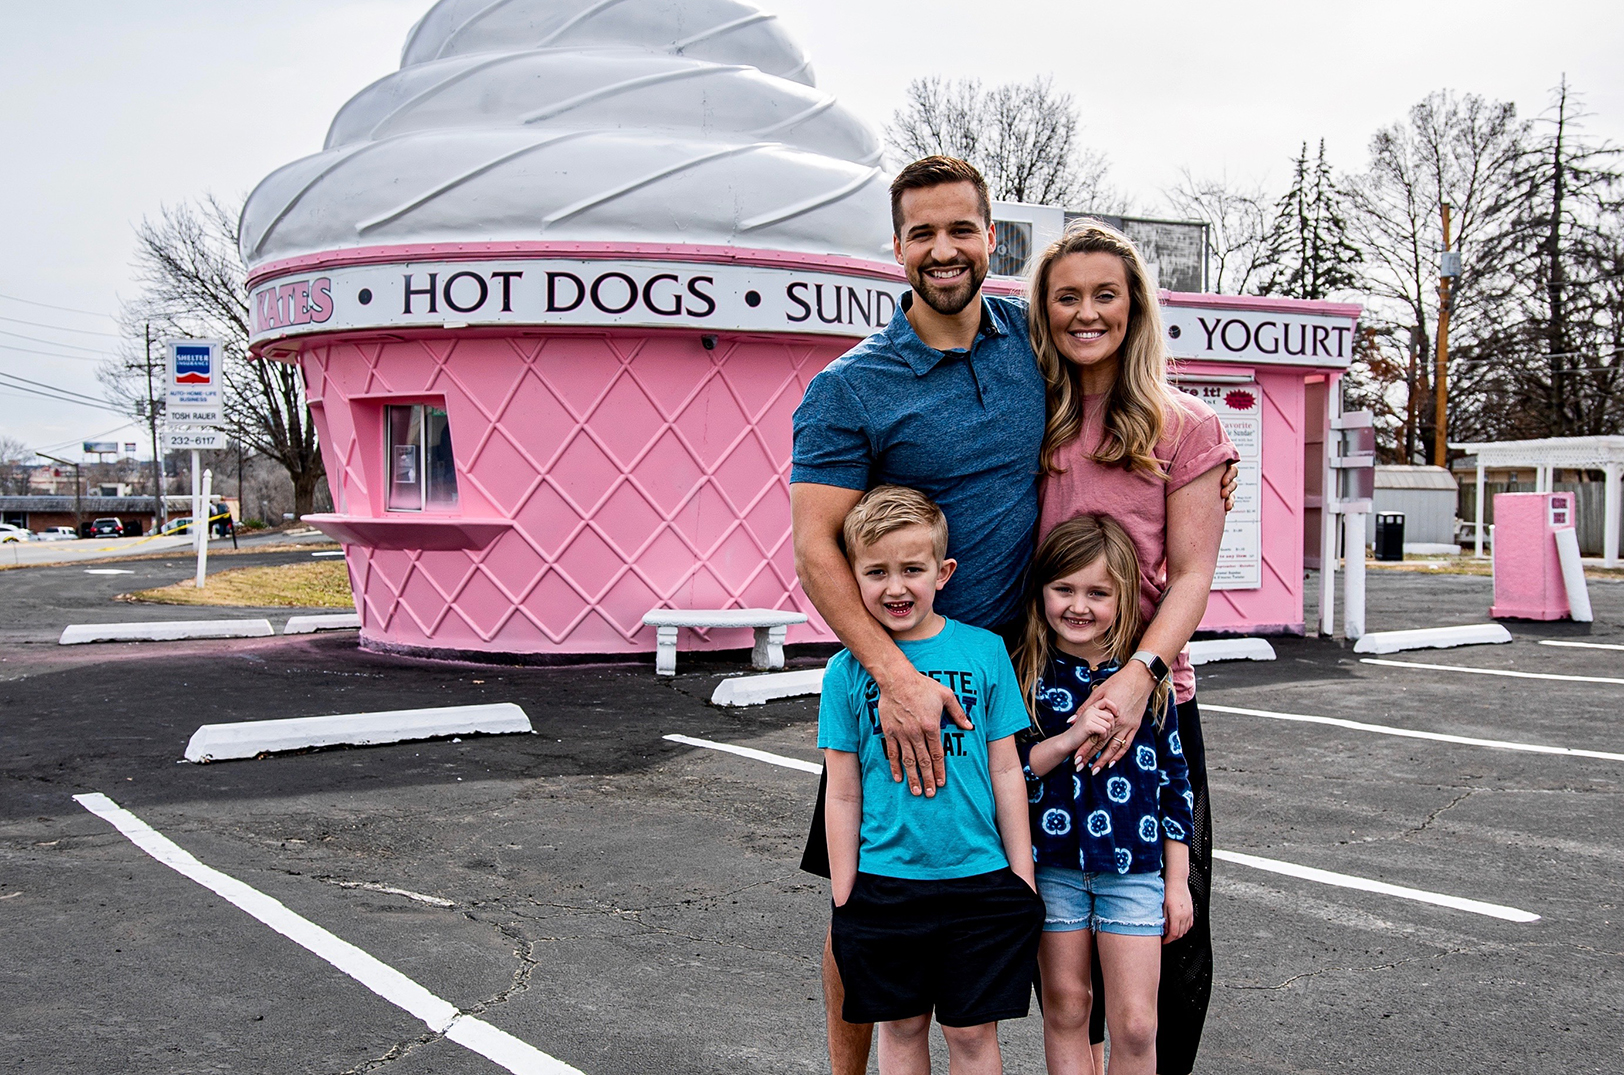 Treat yourself: Iconic pink cone fits entrepreneur’s hunger for nostalgia, growth 